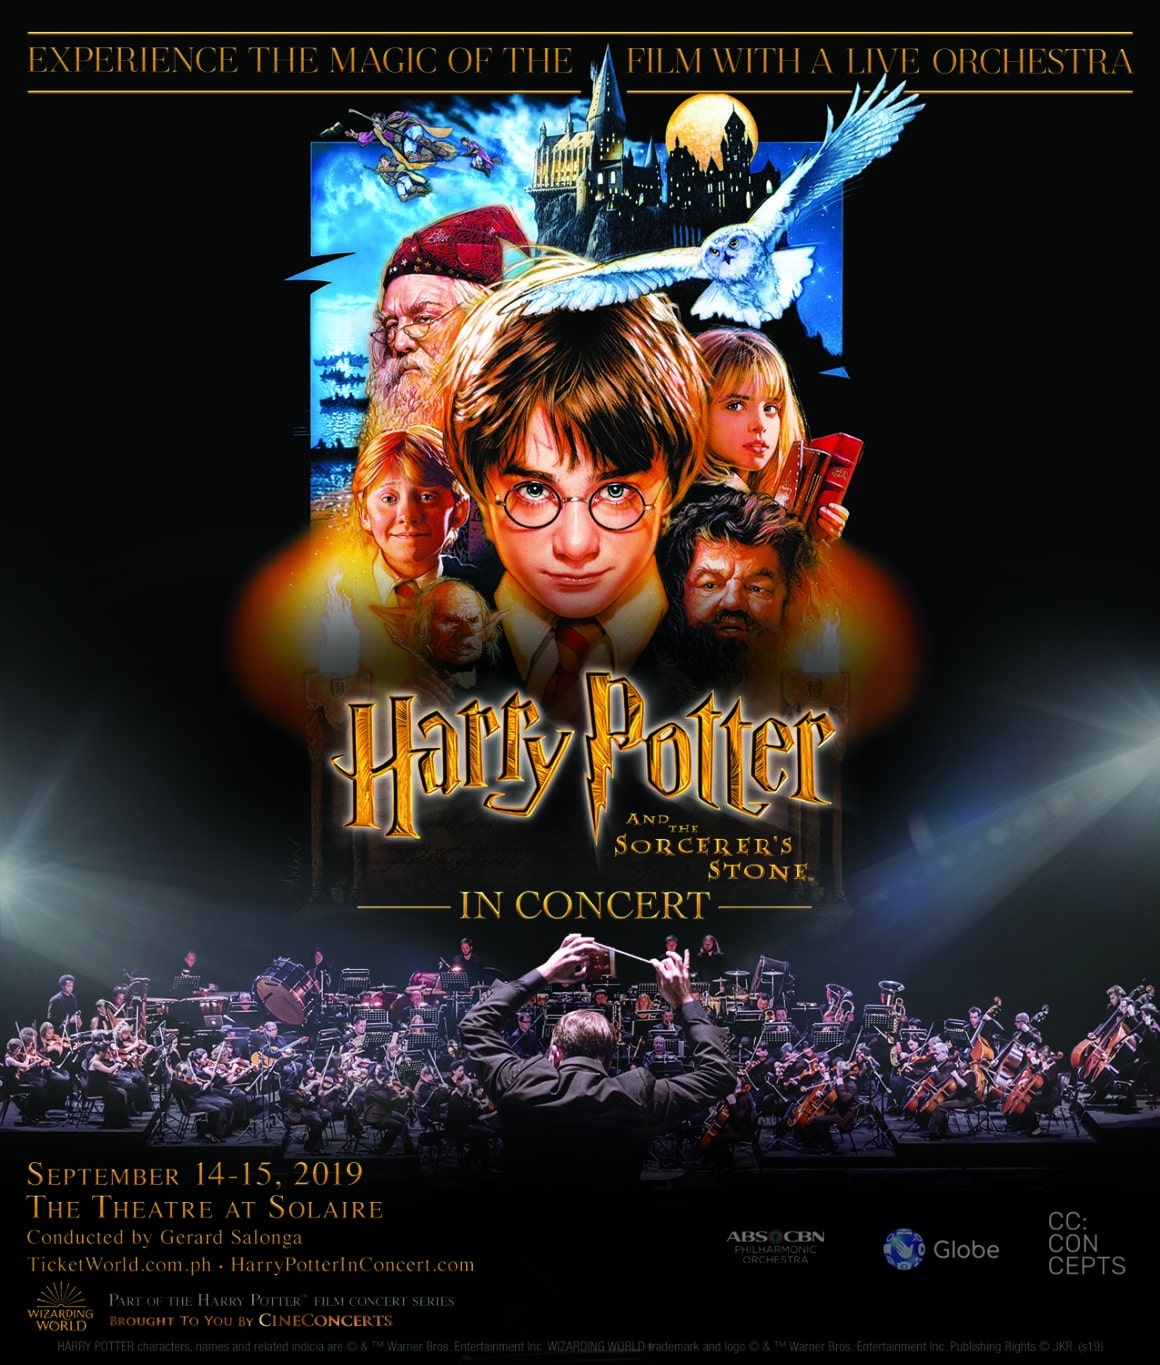 âHarry Potter in Concertâ tickets are now on sale